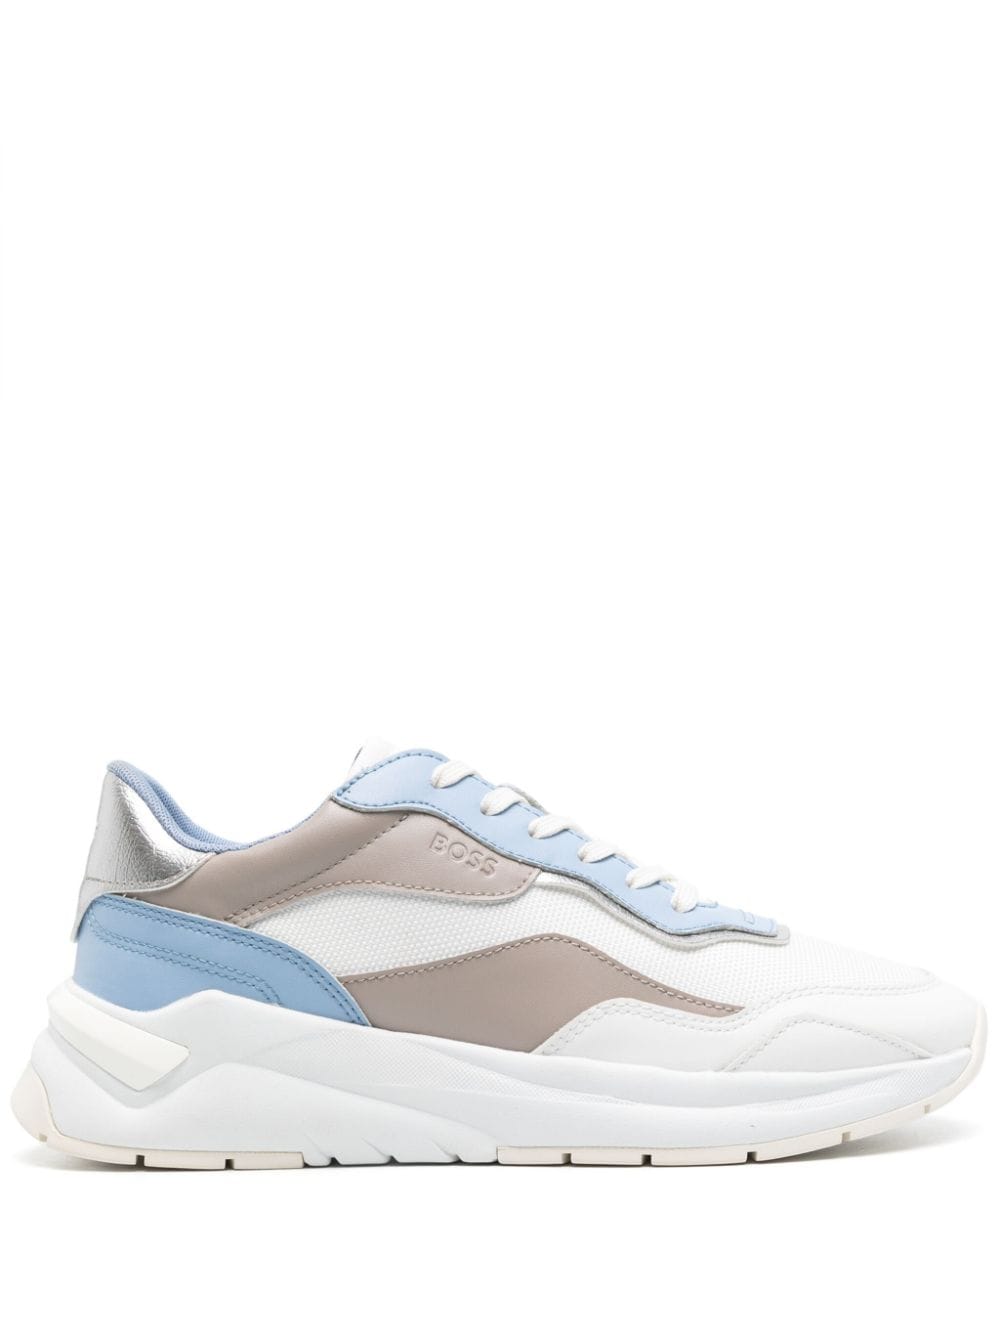 Hugo Boss Colour-block Panelled Sneakers In 蓝色